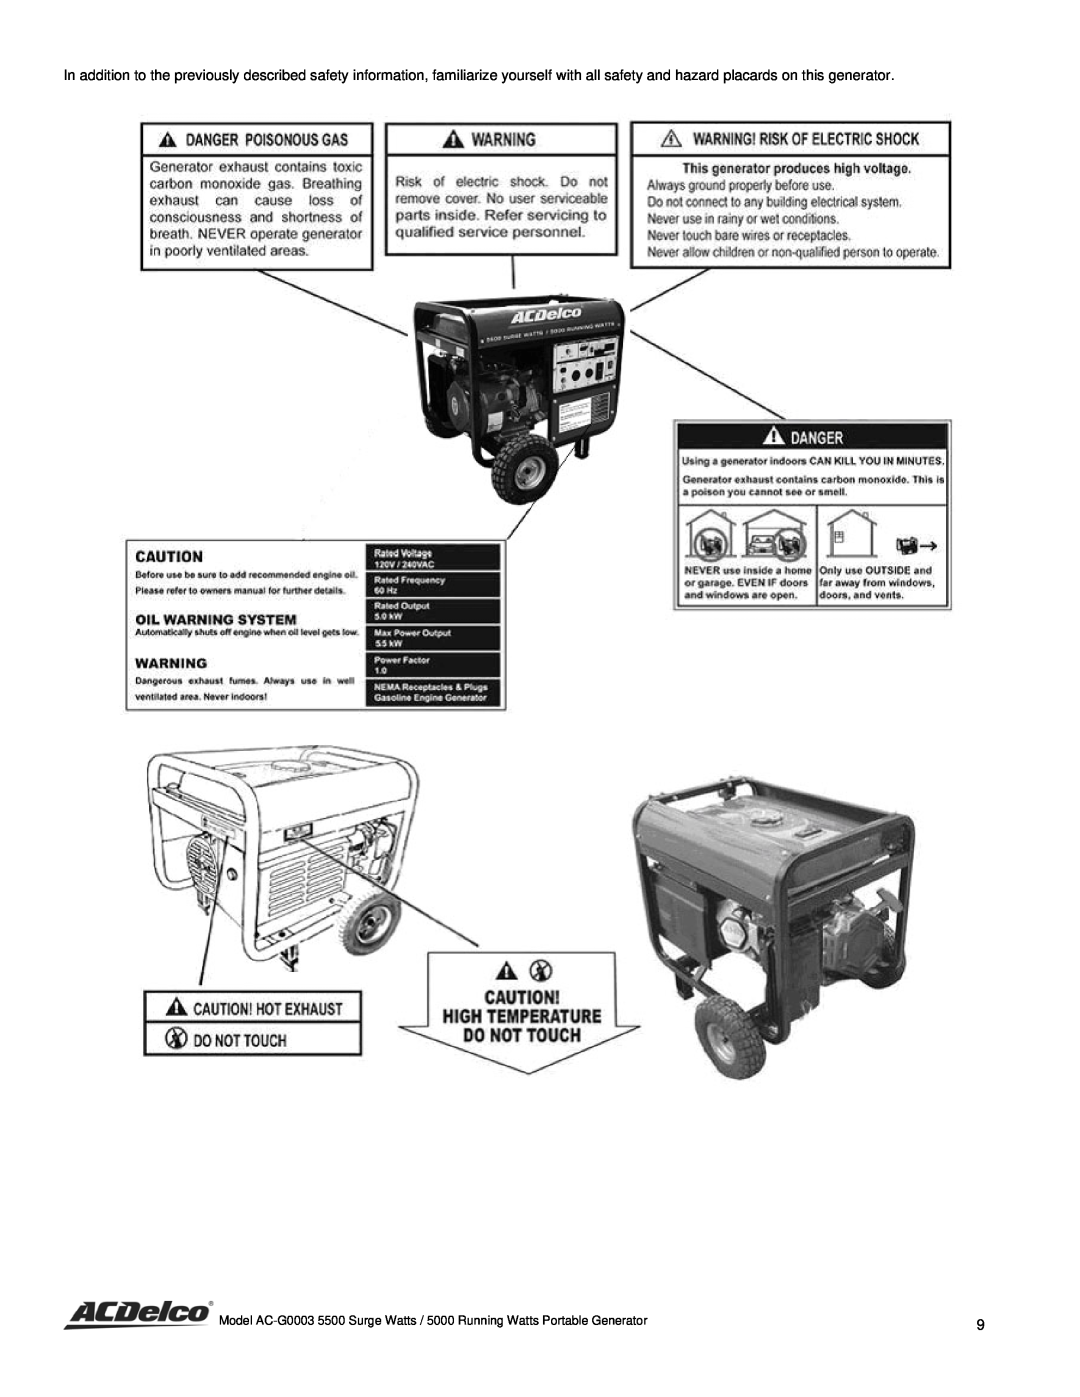 ACDelco AC-G0003 instruction manual 